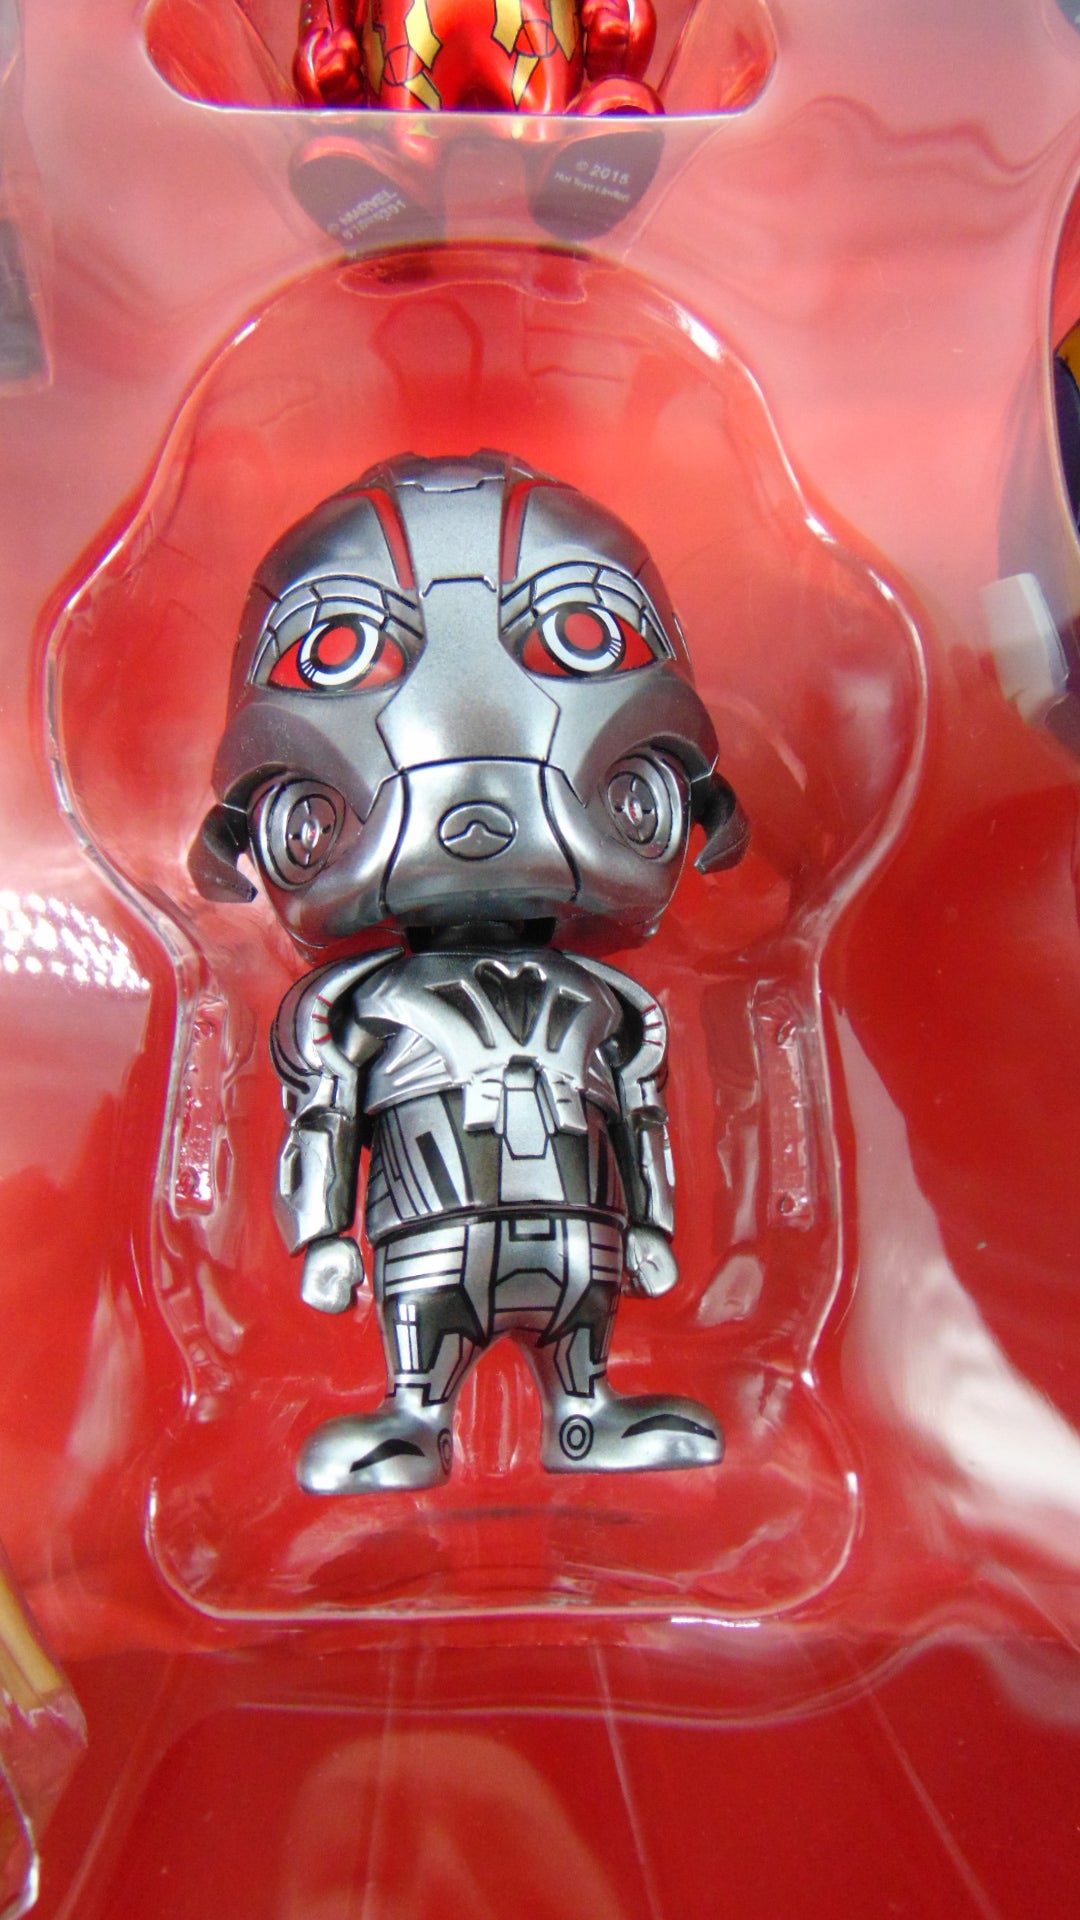 Avengers Age of Ultron Marvel Cosbaby Collectible Set Series 2